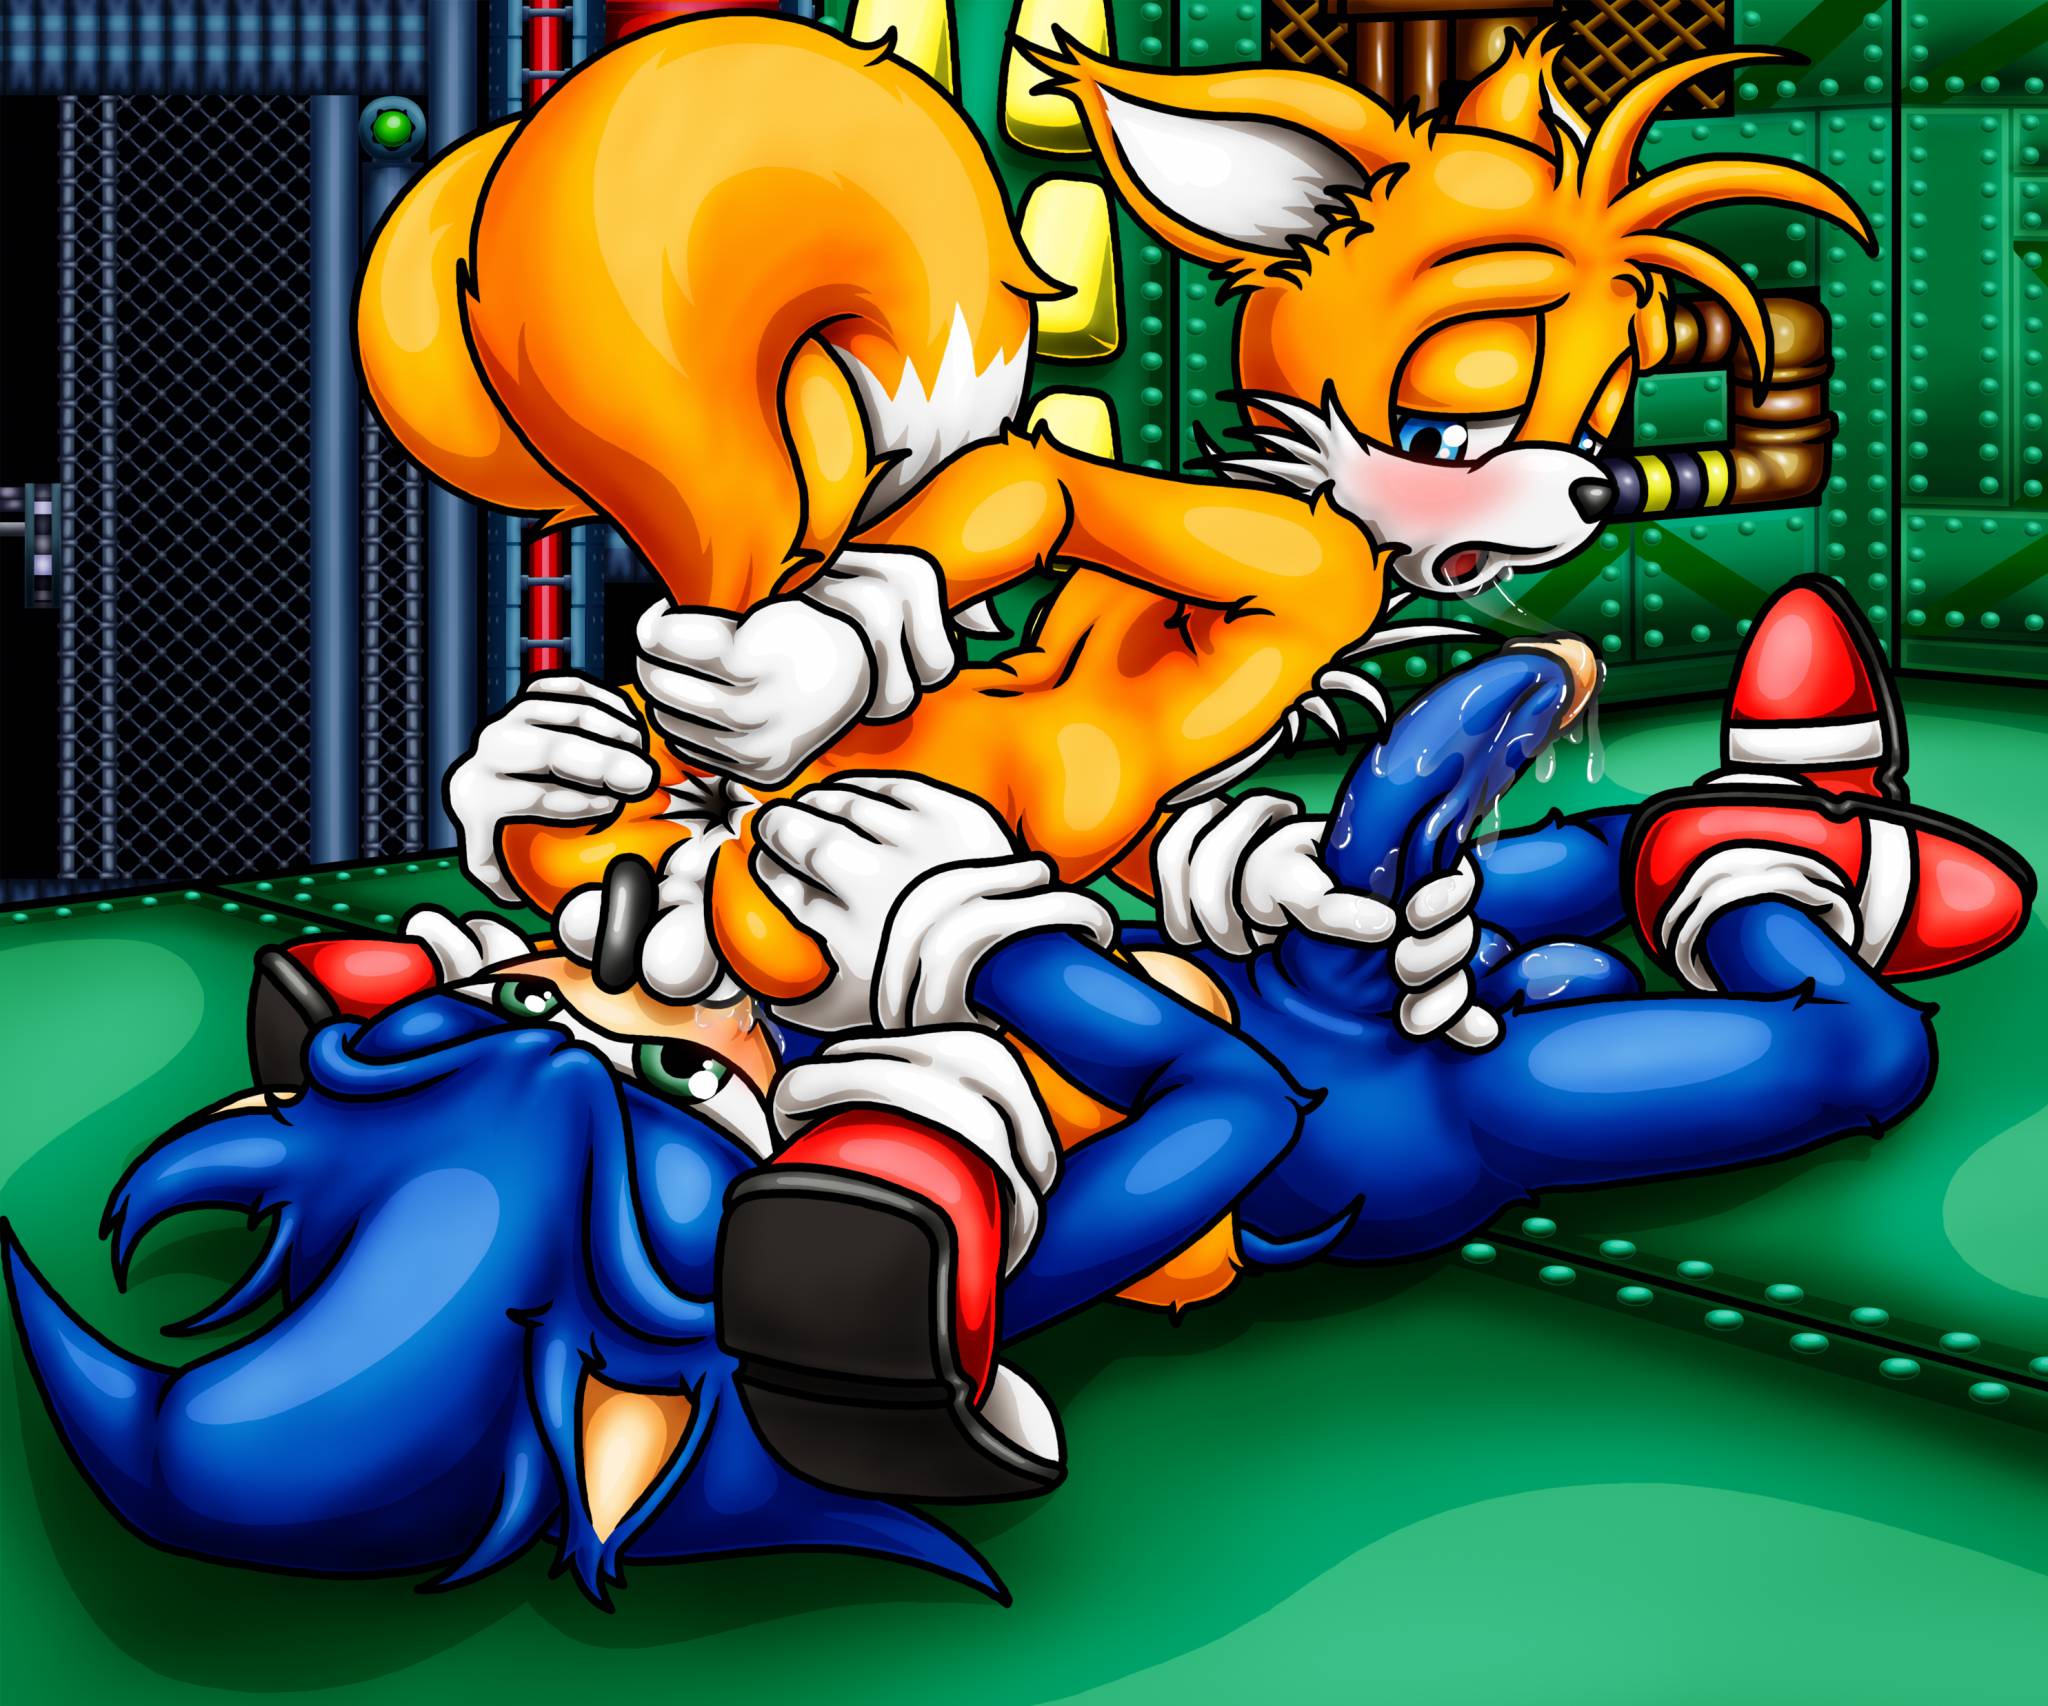 sonic the hedgehog+tails.